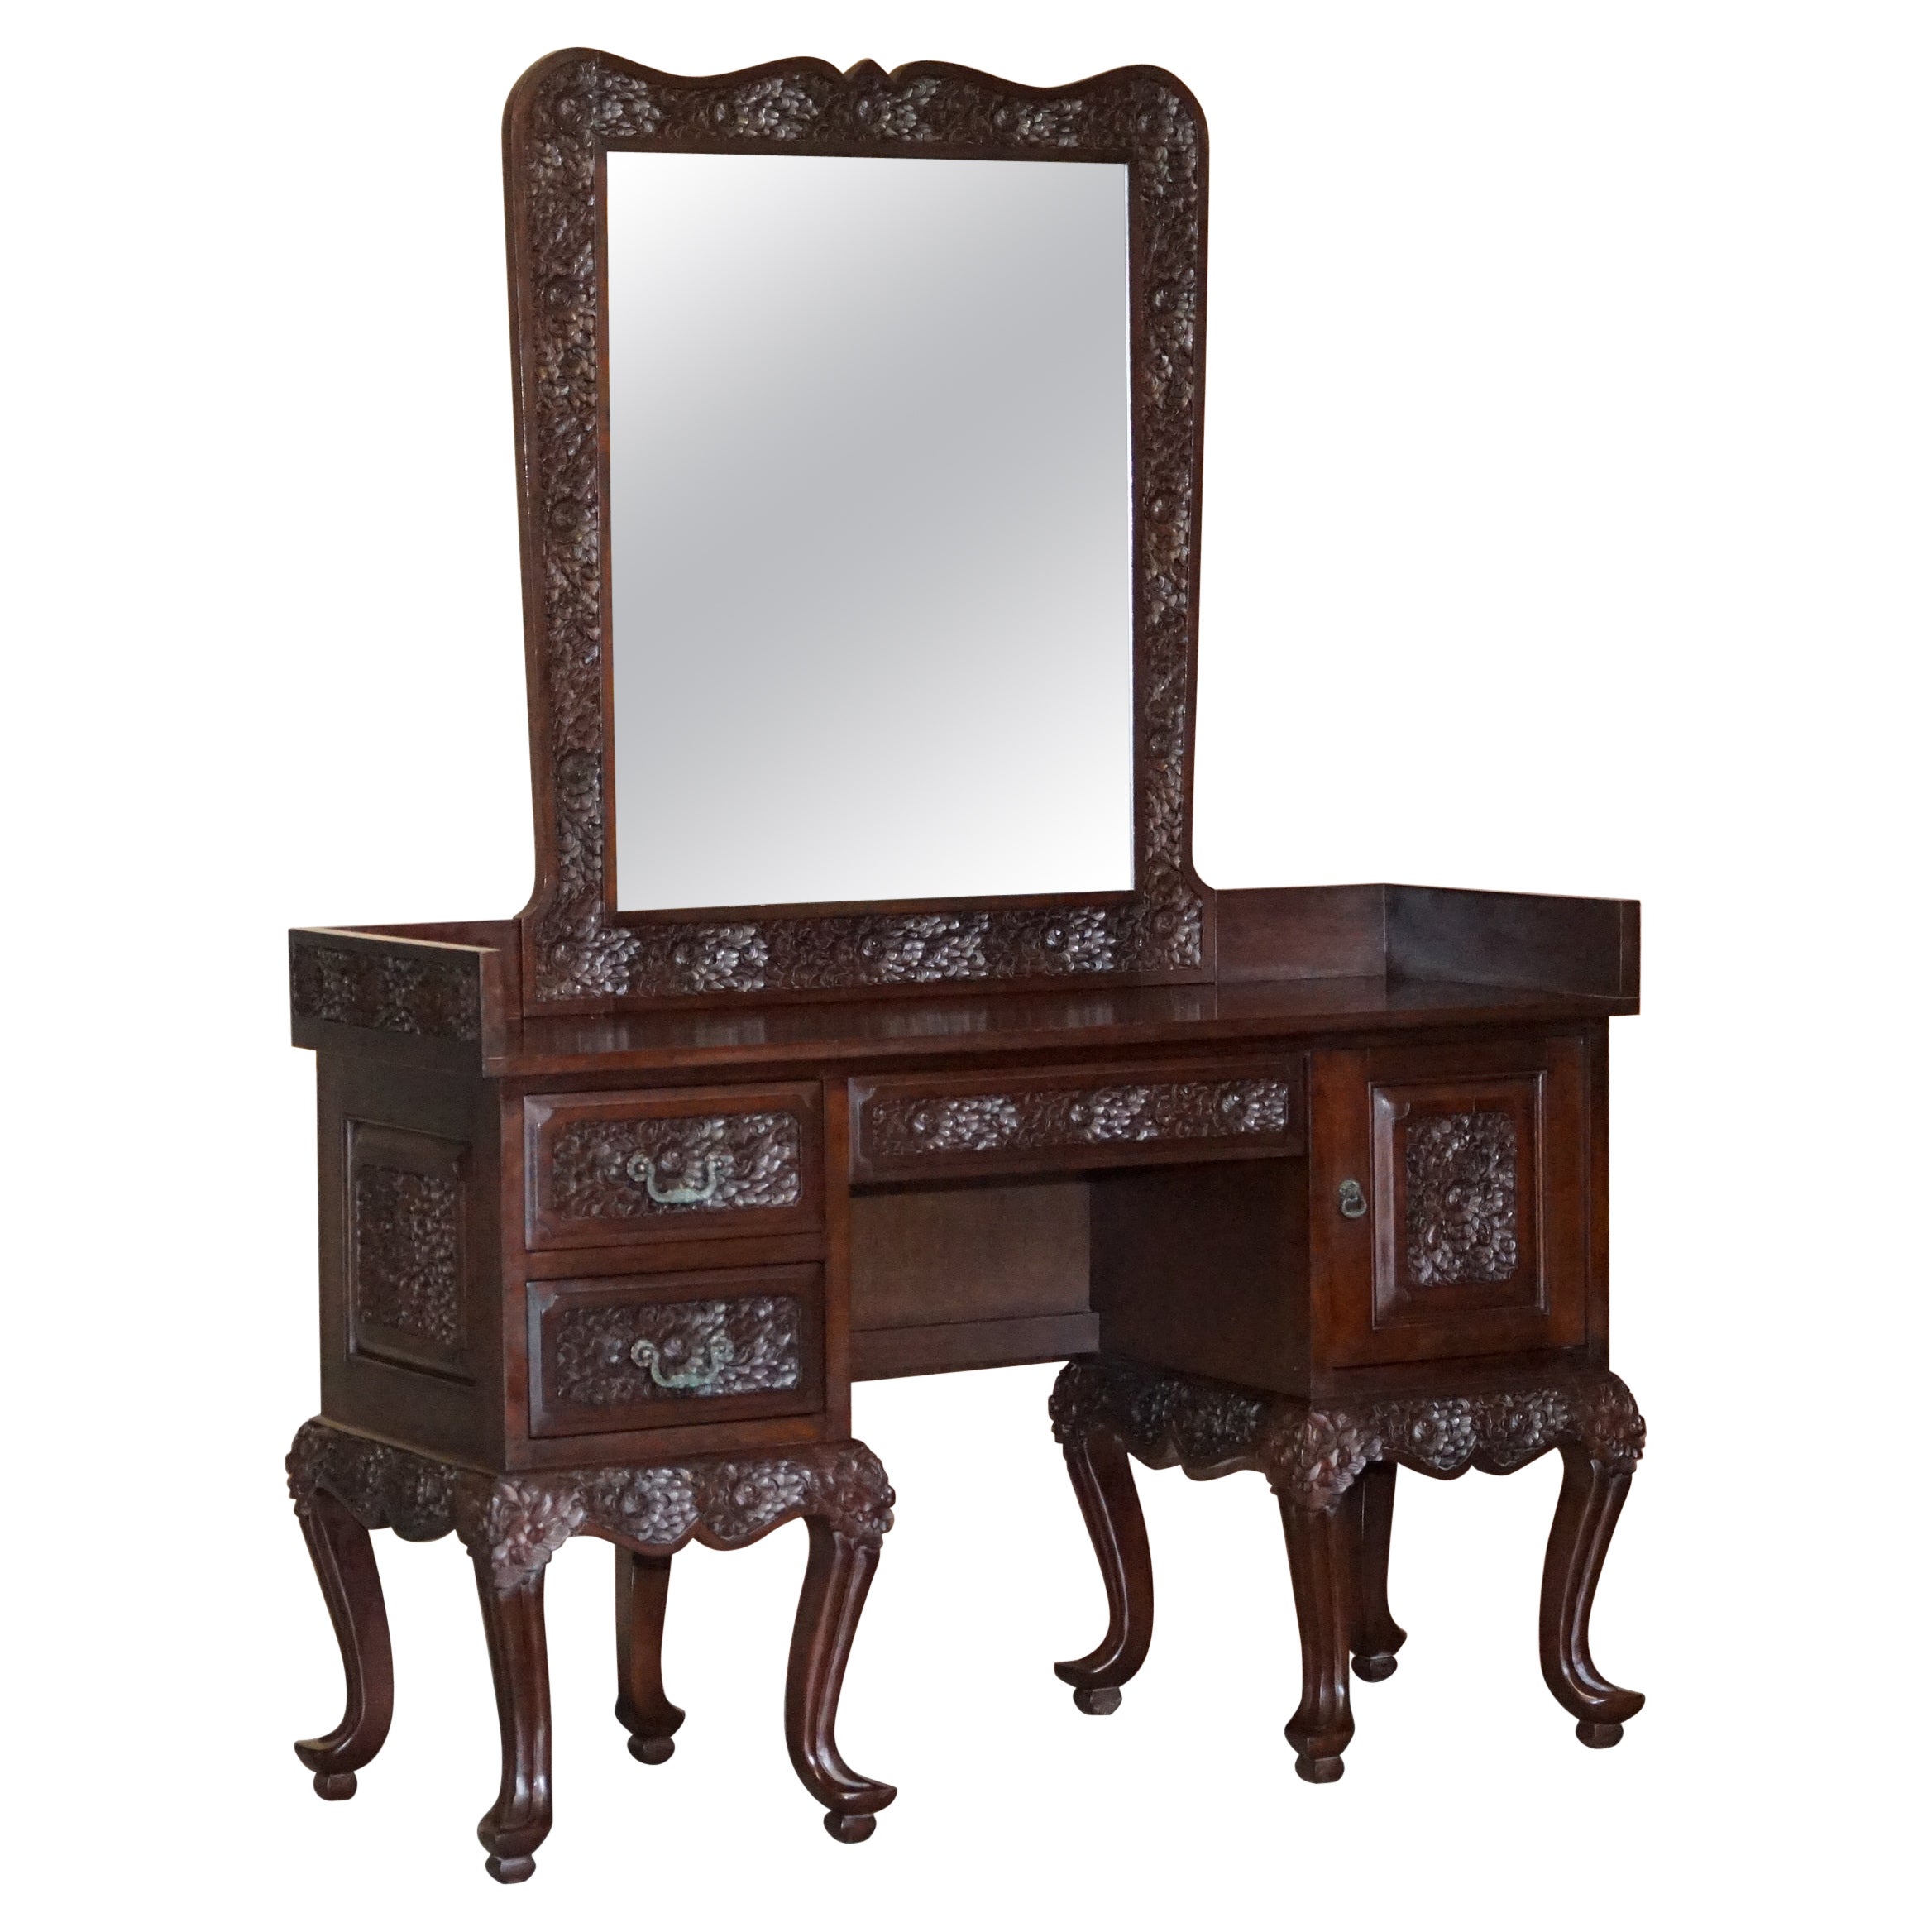 Heavily Carved Floral Decorated Indian Hardwood Dressing Table & Mirror